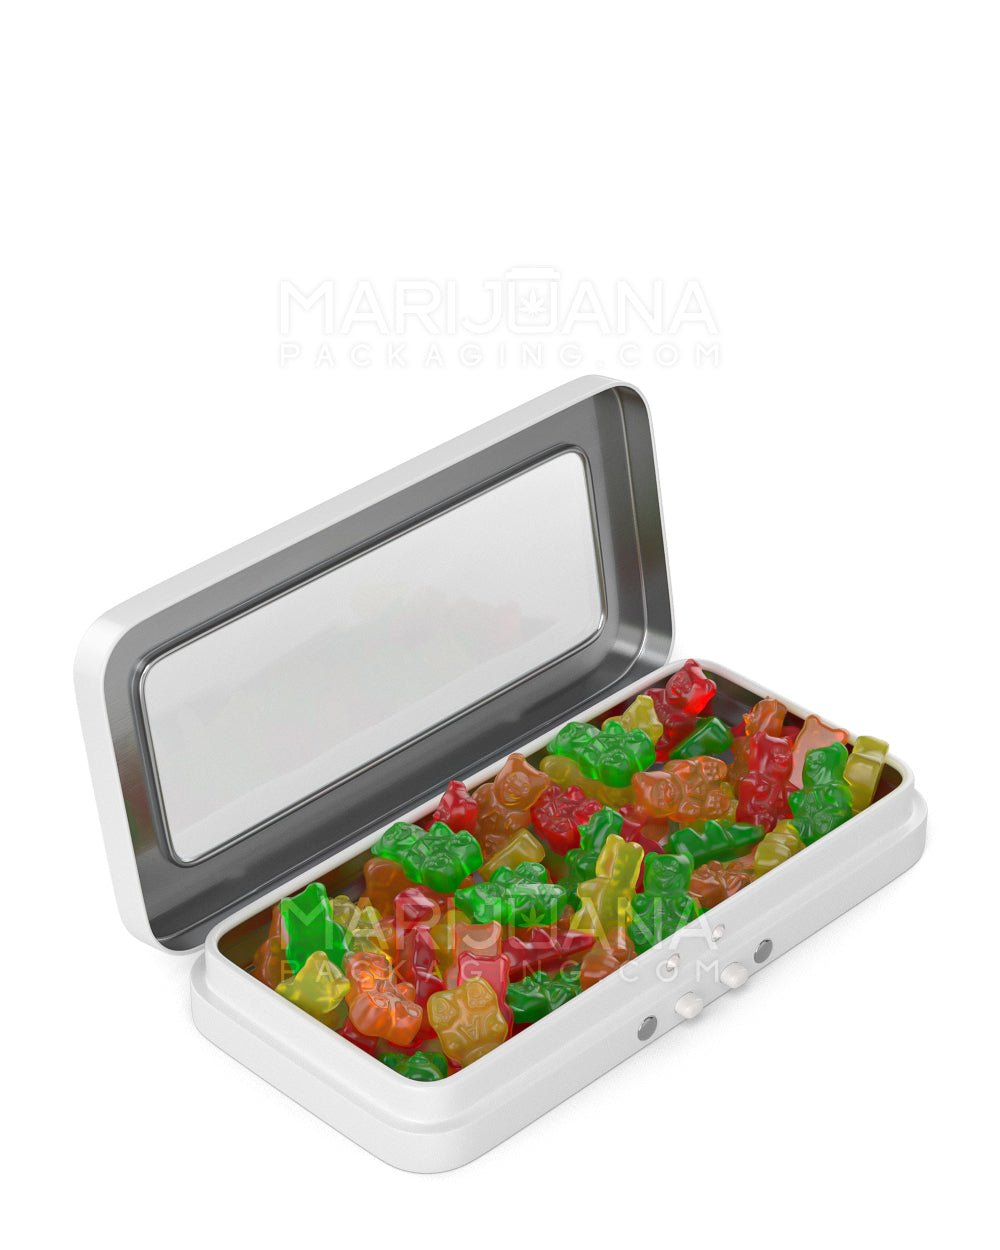 Child Resistant & Sustainable | Hinged-Lid Large Vista Edible & Joint Box w/ See-Through Window |  White Tin  - 2